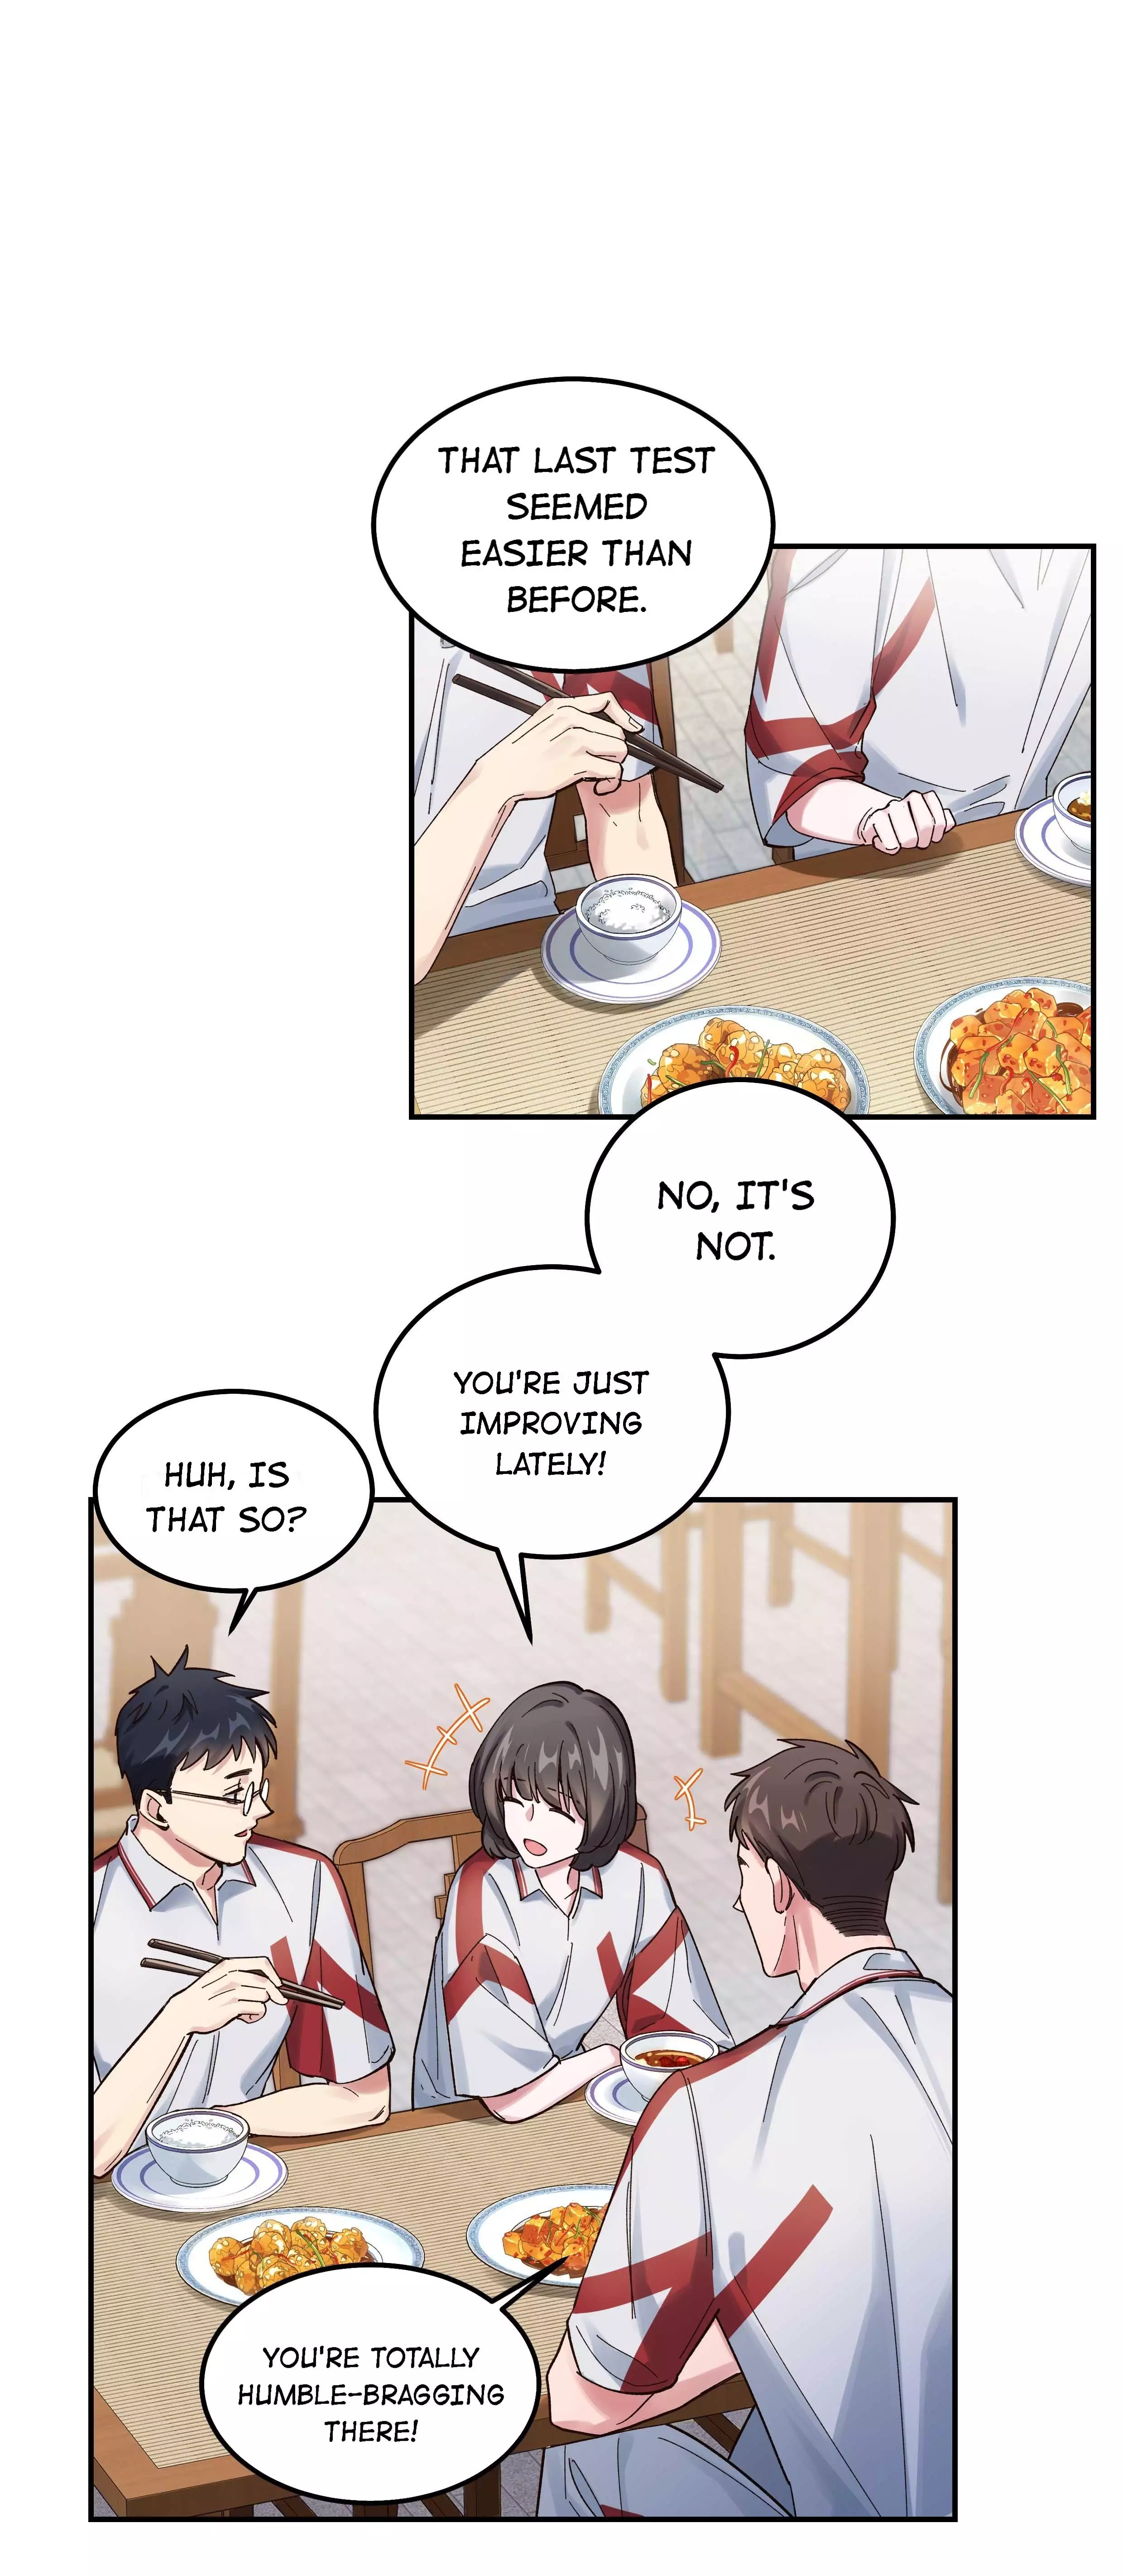 Pixiu's Eatery, No Way Out - 41.1 page 1